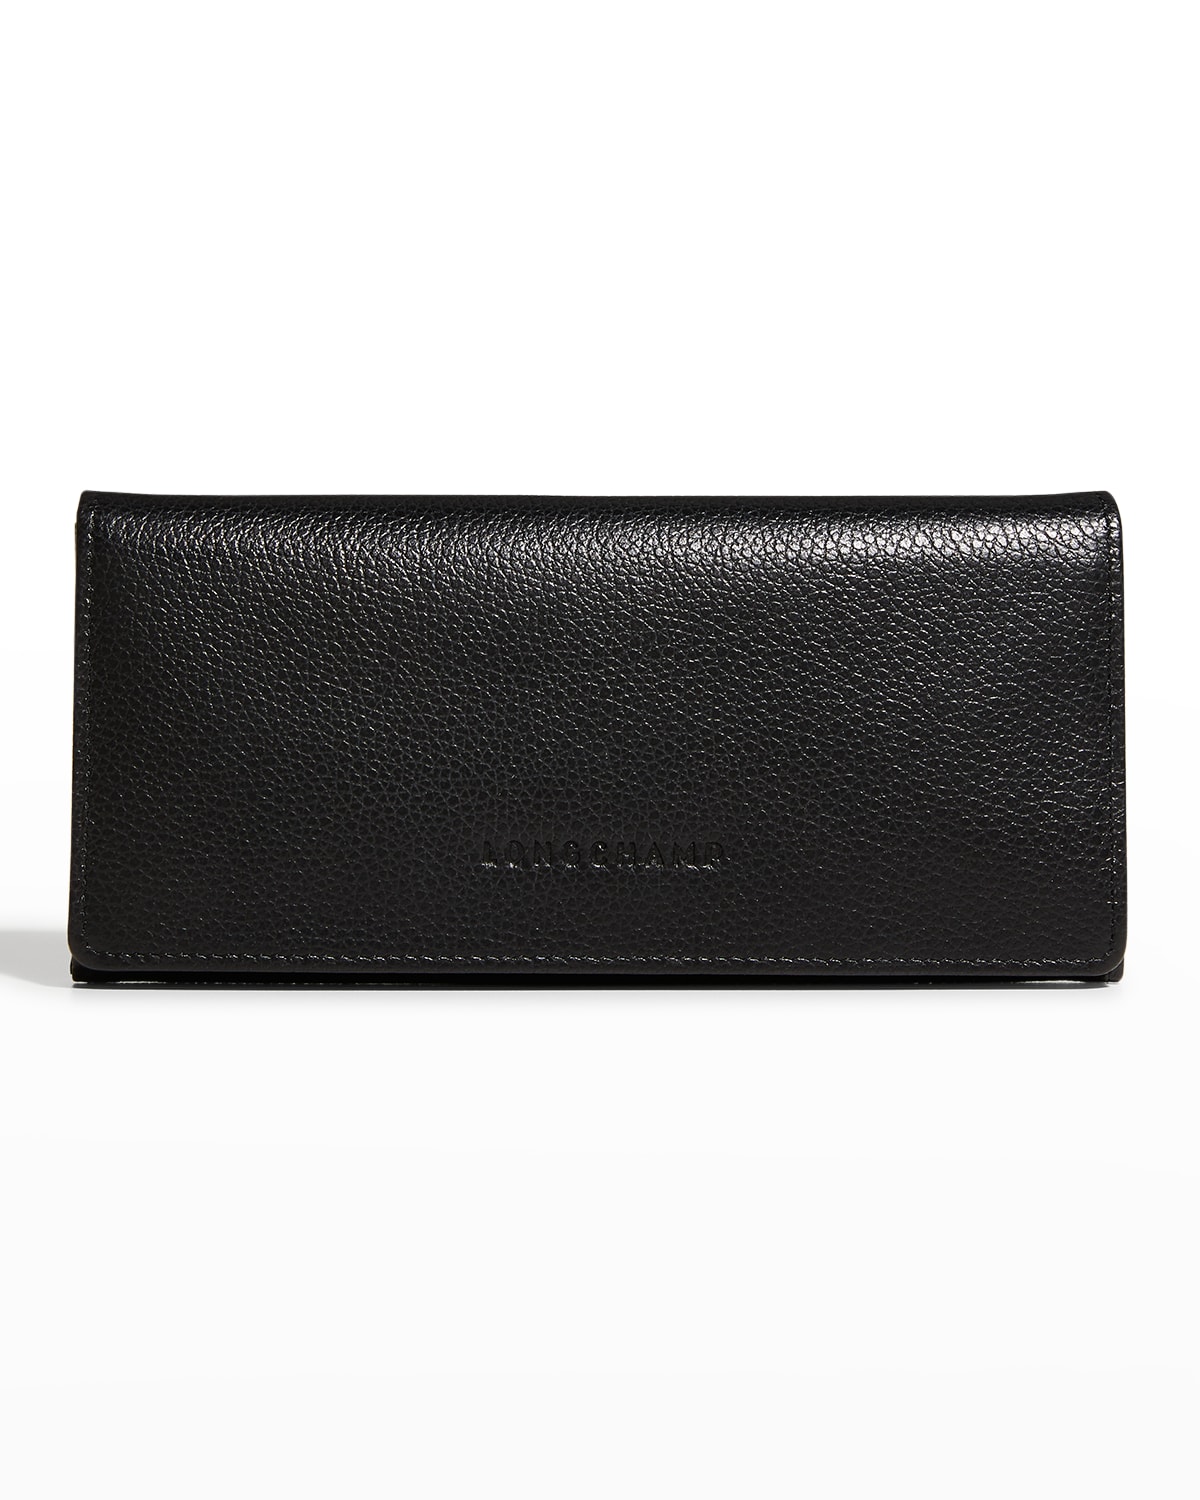 Takestop® Plain Black Spring Snap Close Imitation Leather Coin Purse Wallet for Men and Women